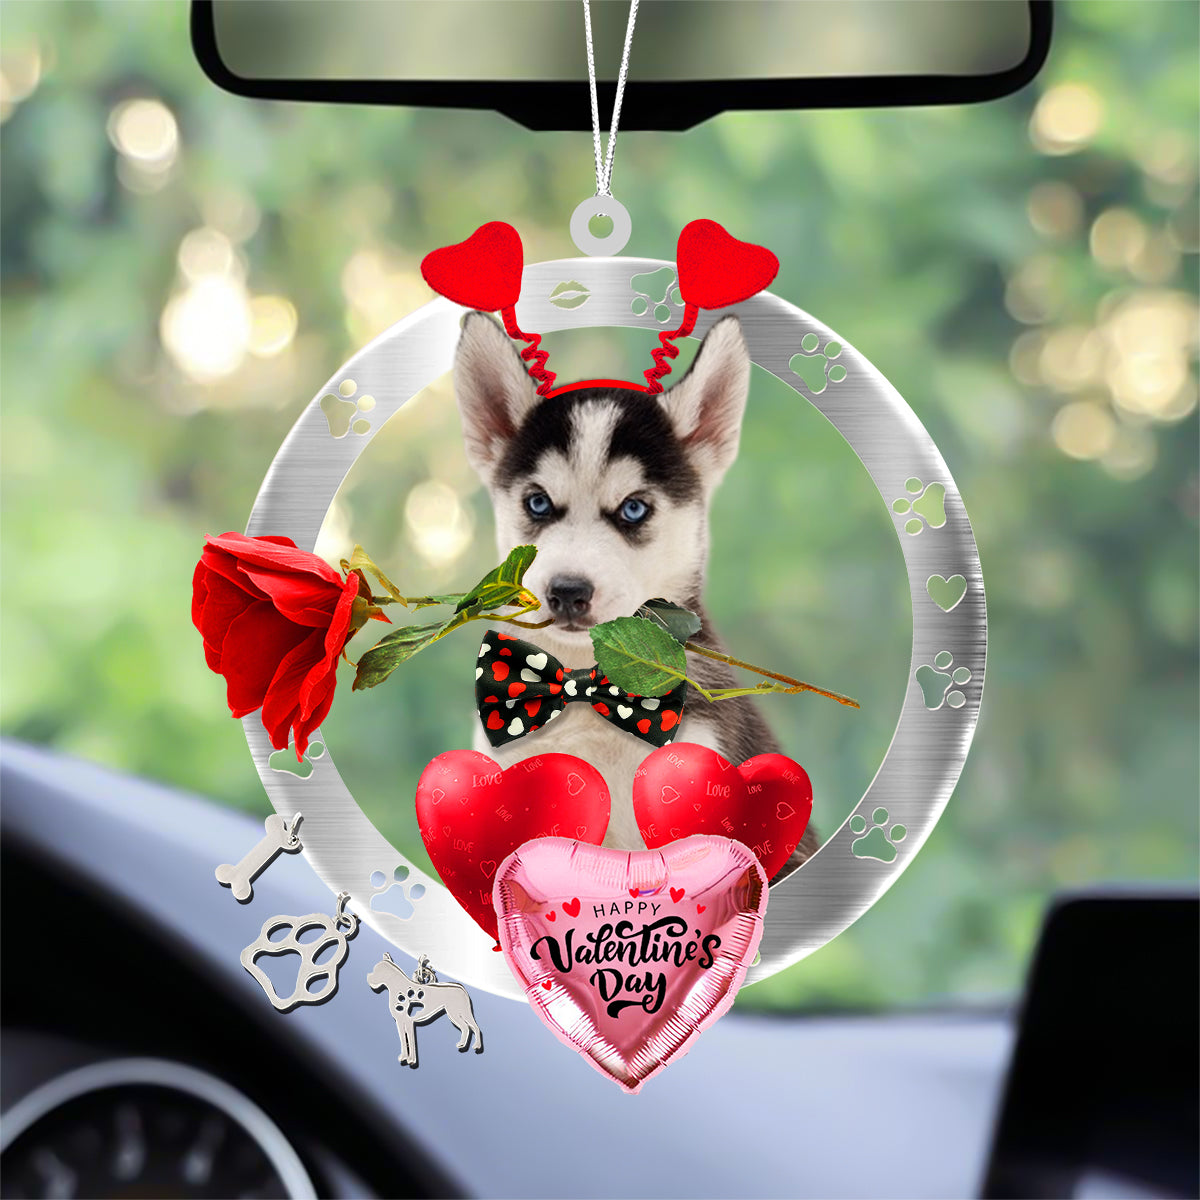 Husky With Rose & Heart Balloon Ornament